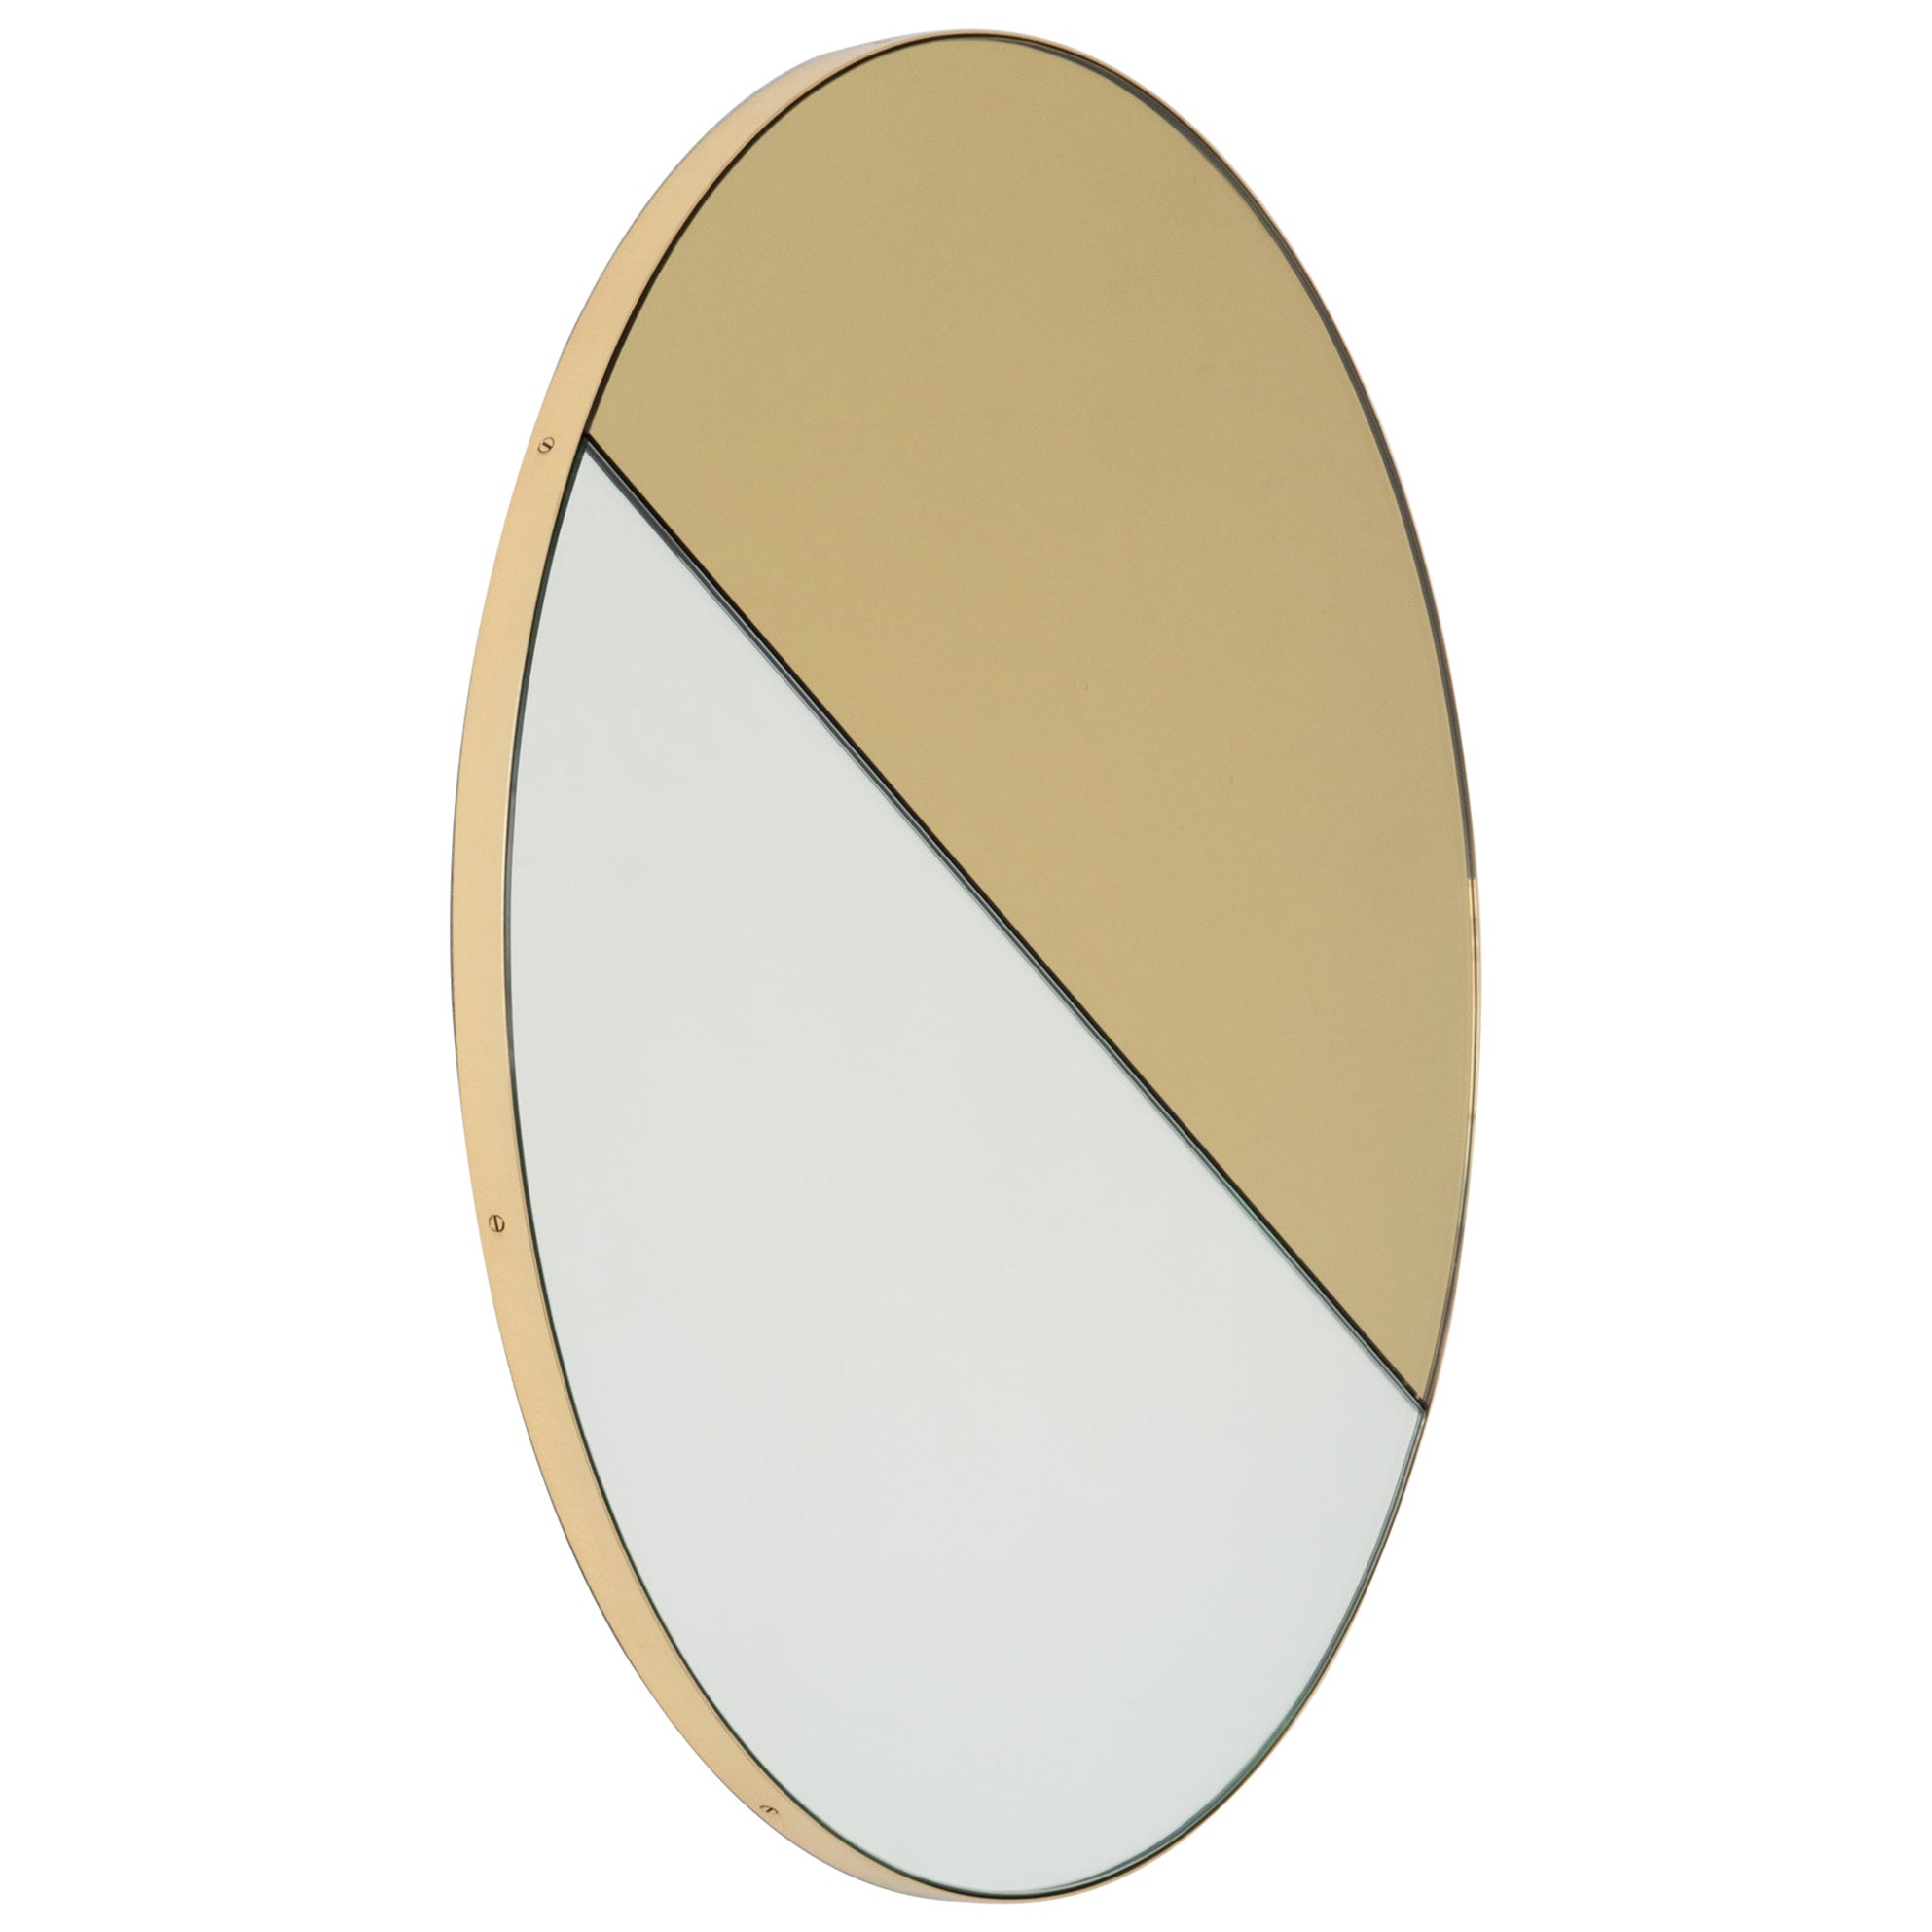 Orbis Dualis Mixed Gold Silver Tinted Round Mirror with Brass Frame, Small